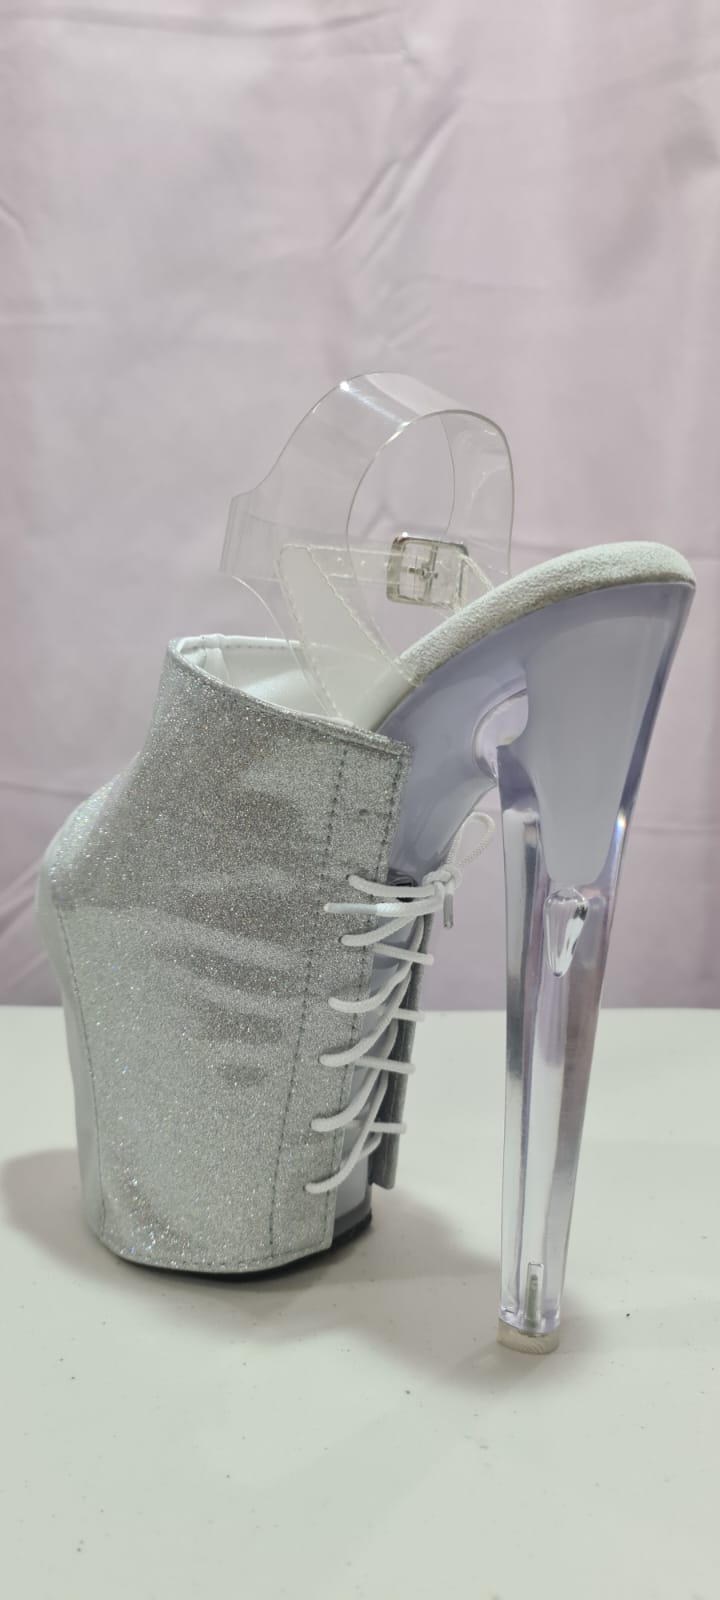 Z PLANET Platform Protectors - Glittery Silver with Laces